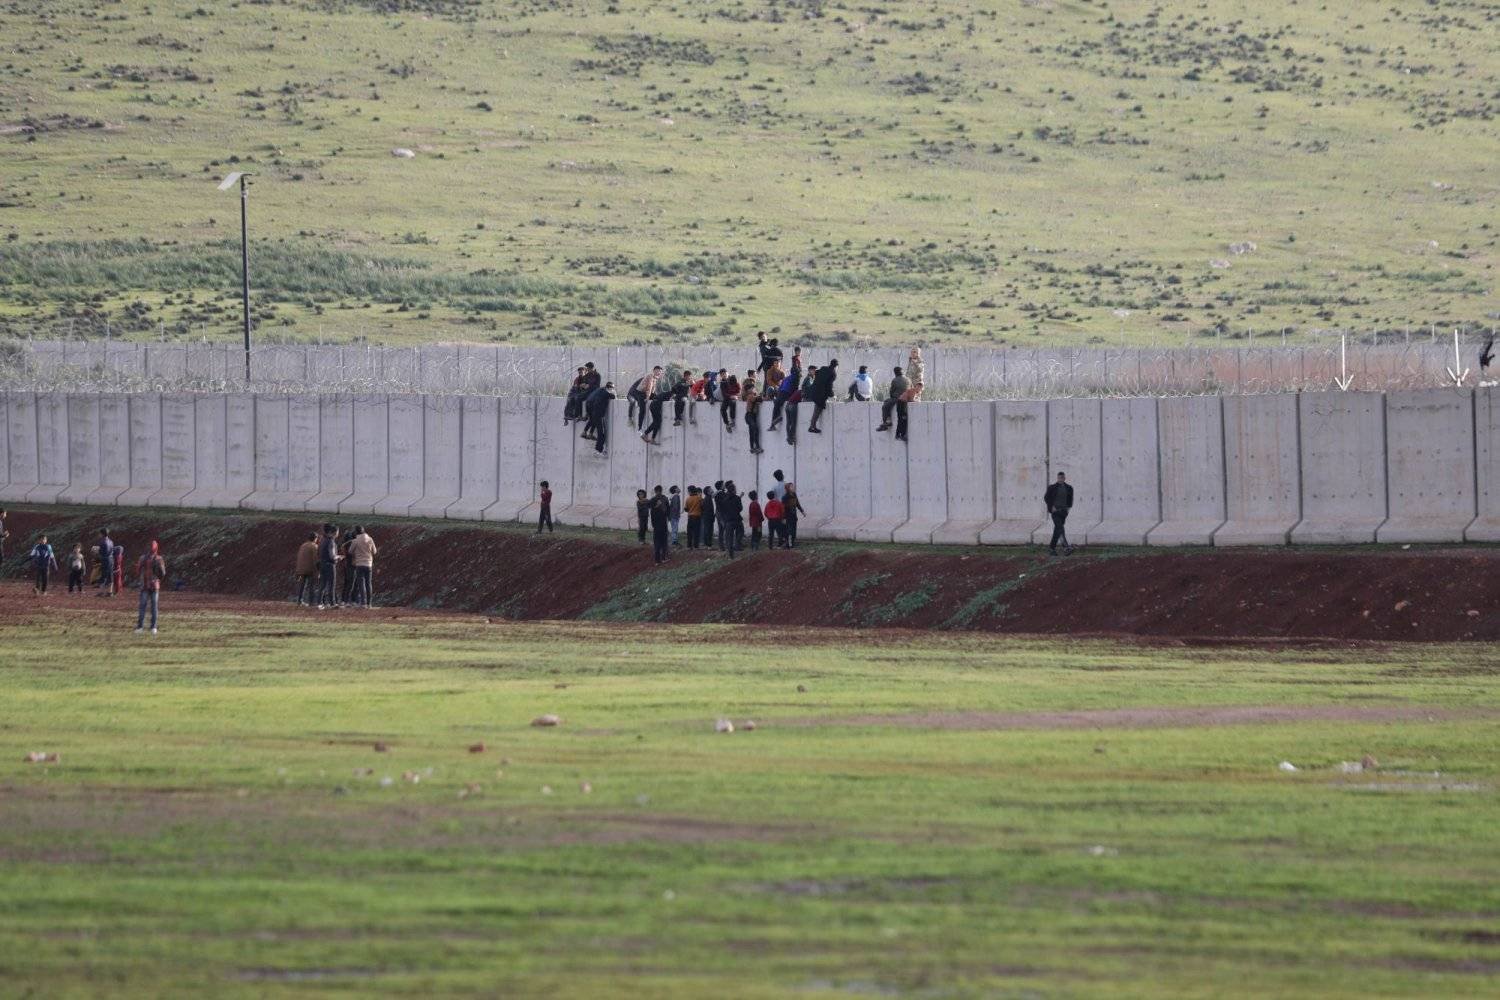 Despite ongoing assaults by Turkish border guards, children still climb to the top of the border wall for recreation (Asharq Al-Awsat)